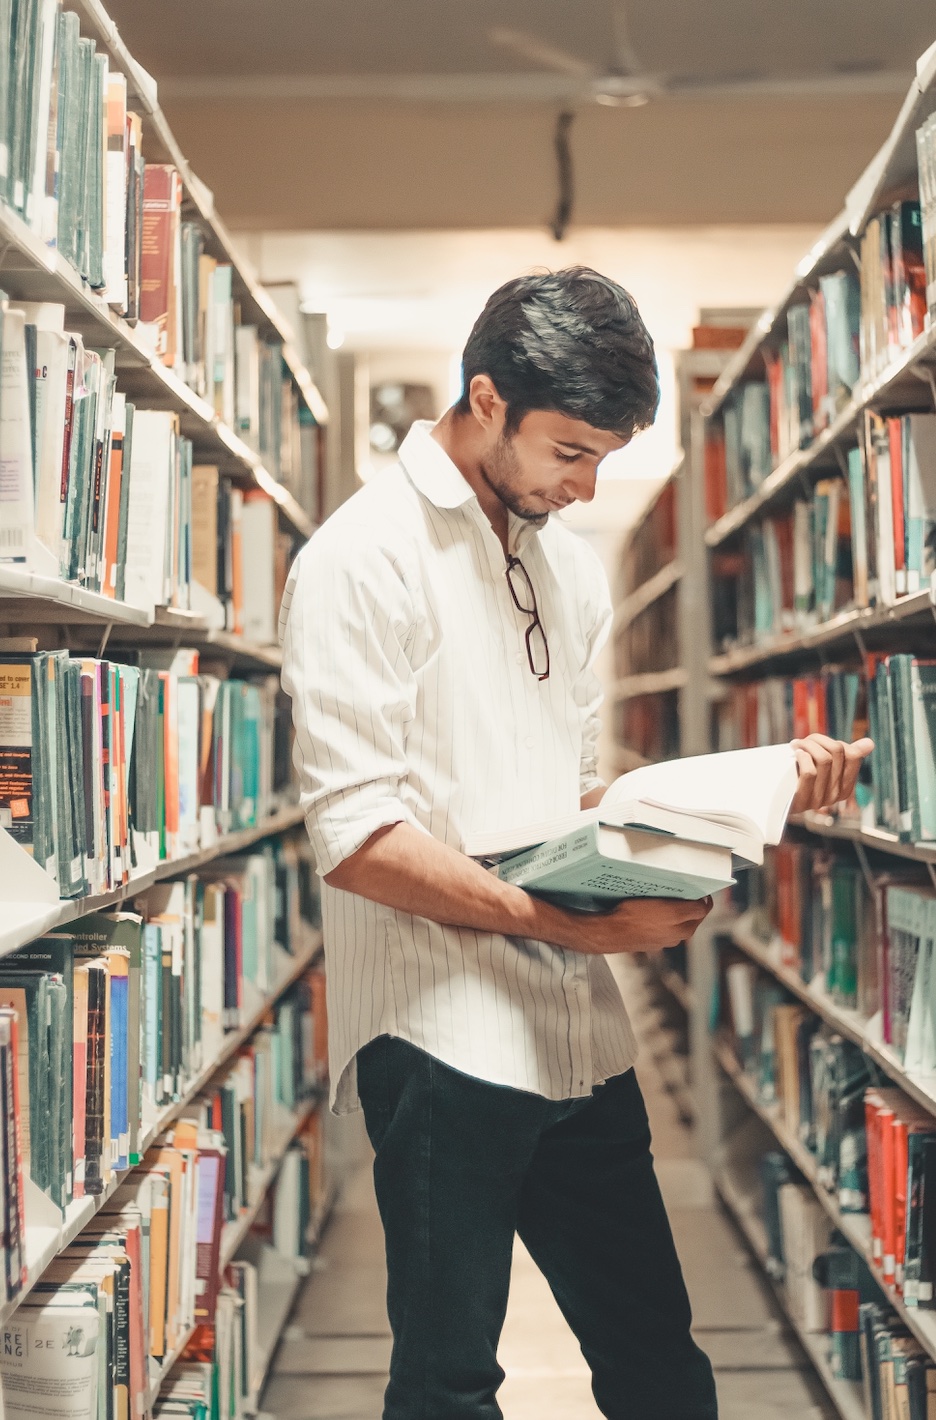 College student at library; image by Dollar Gill, via Unsplash.com.